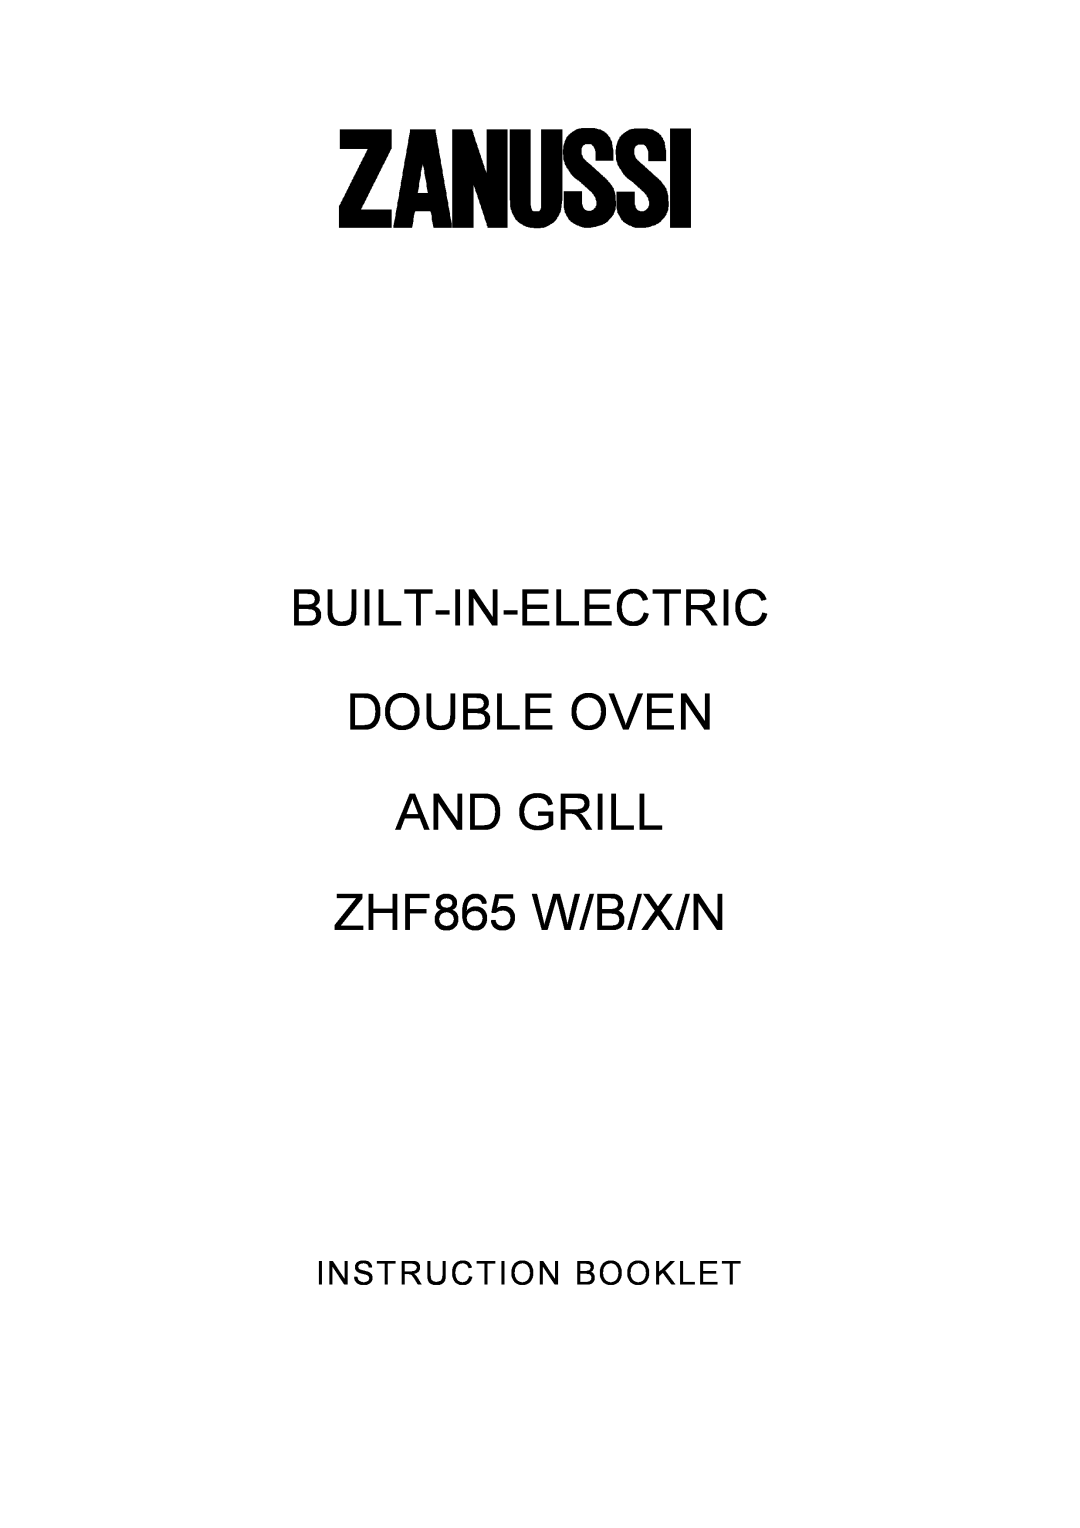 Zanussi manual Built-In-Electric, DOUBLE OVEN AND GRILL ZHF865 W/B/X/N, Instruction Booklet 